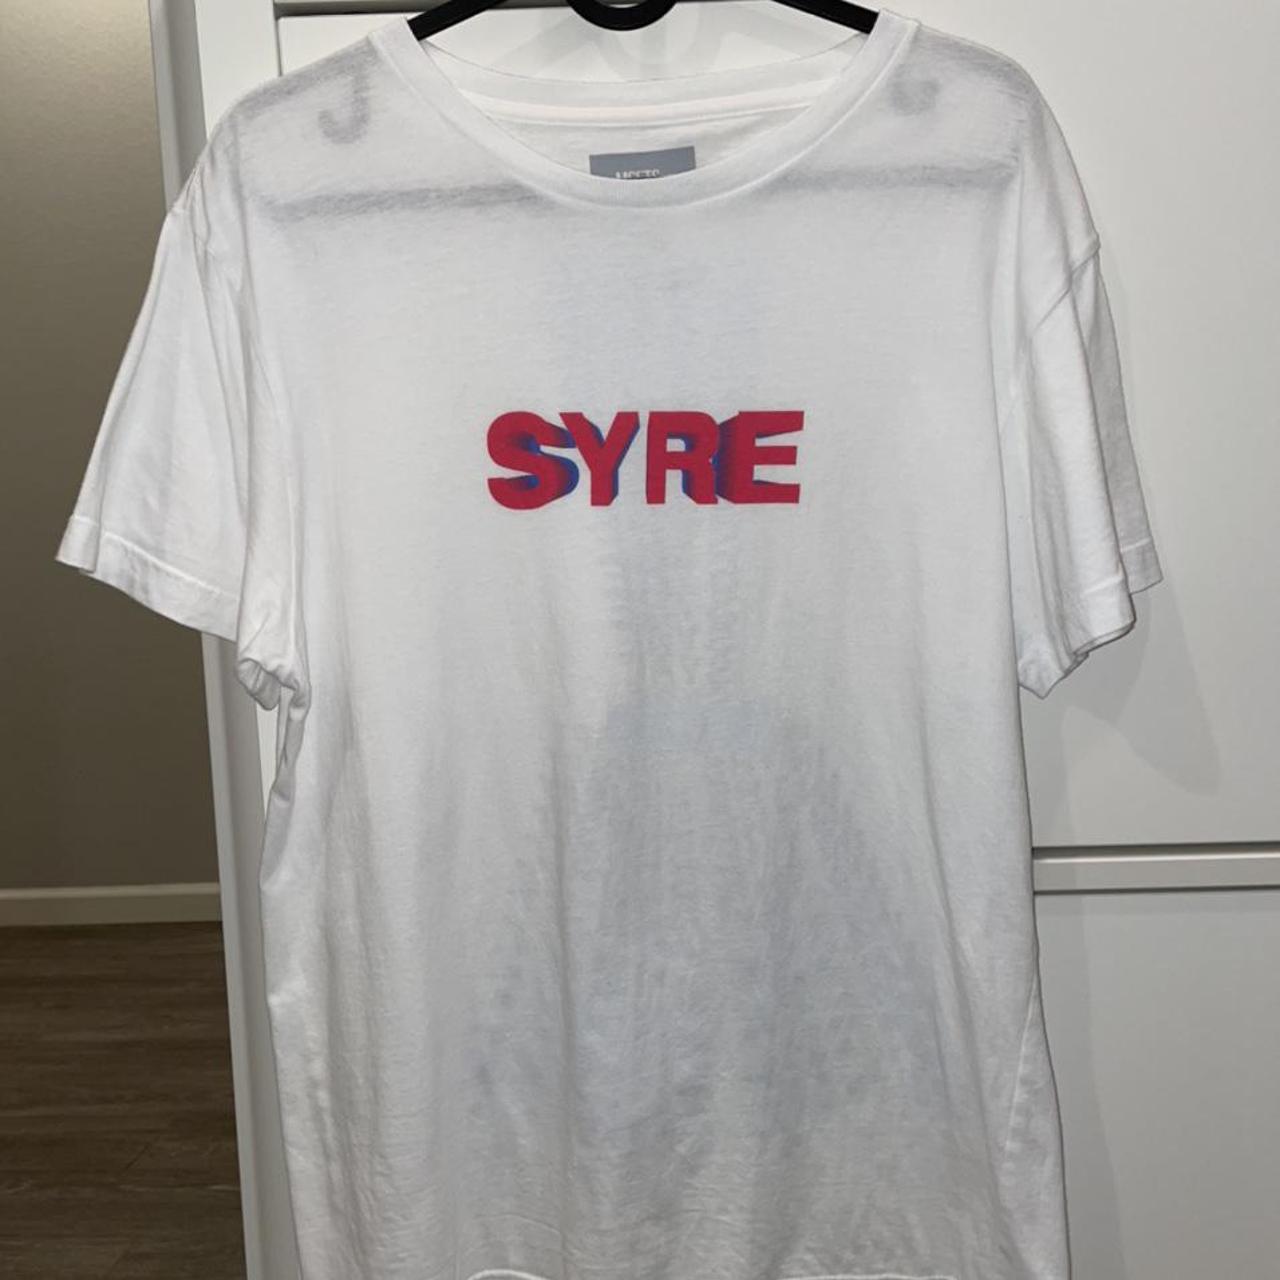 Limited 2018 jaden smith SYRE TSHIRT! One of the... - Depop